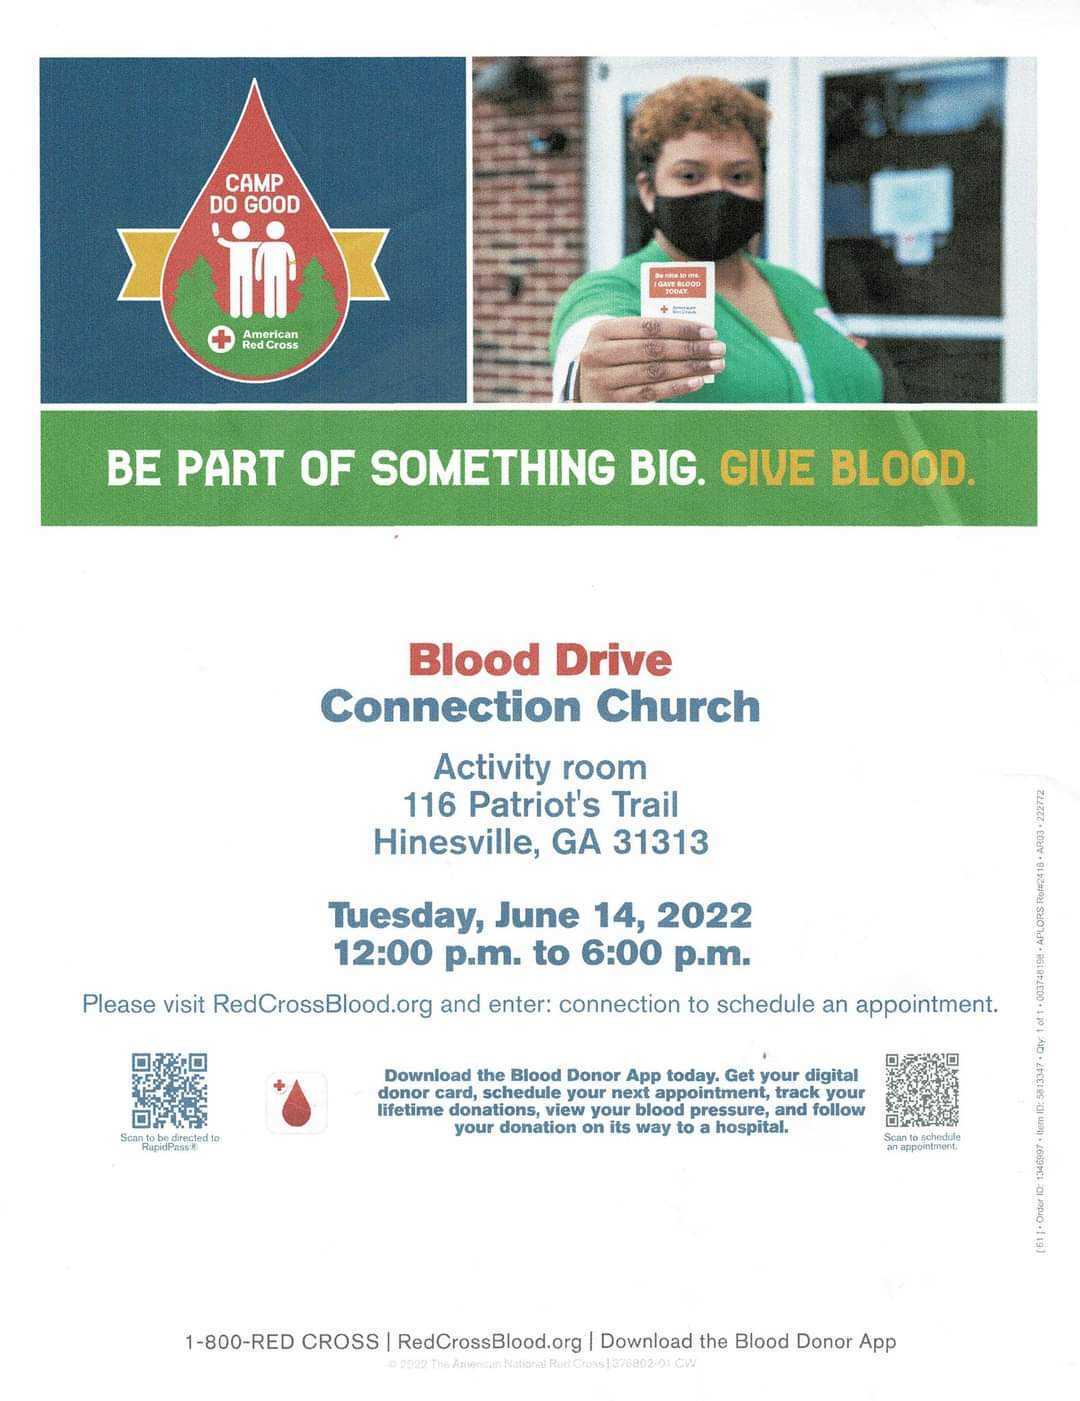 American Red Cross Blood Drive at Connection Church